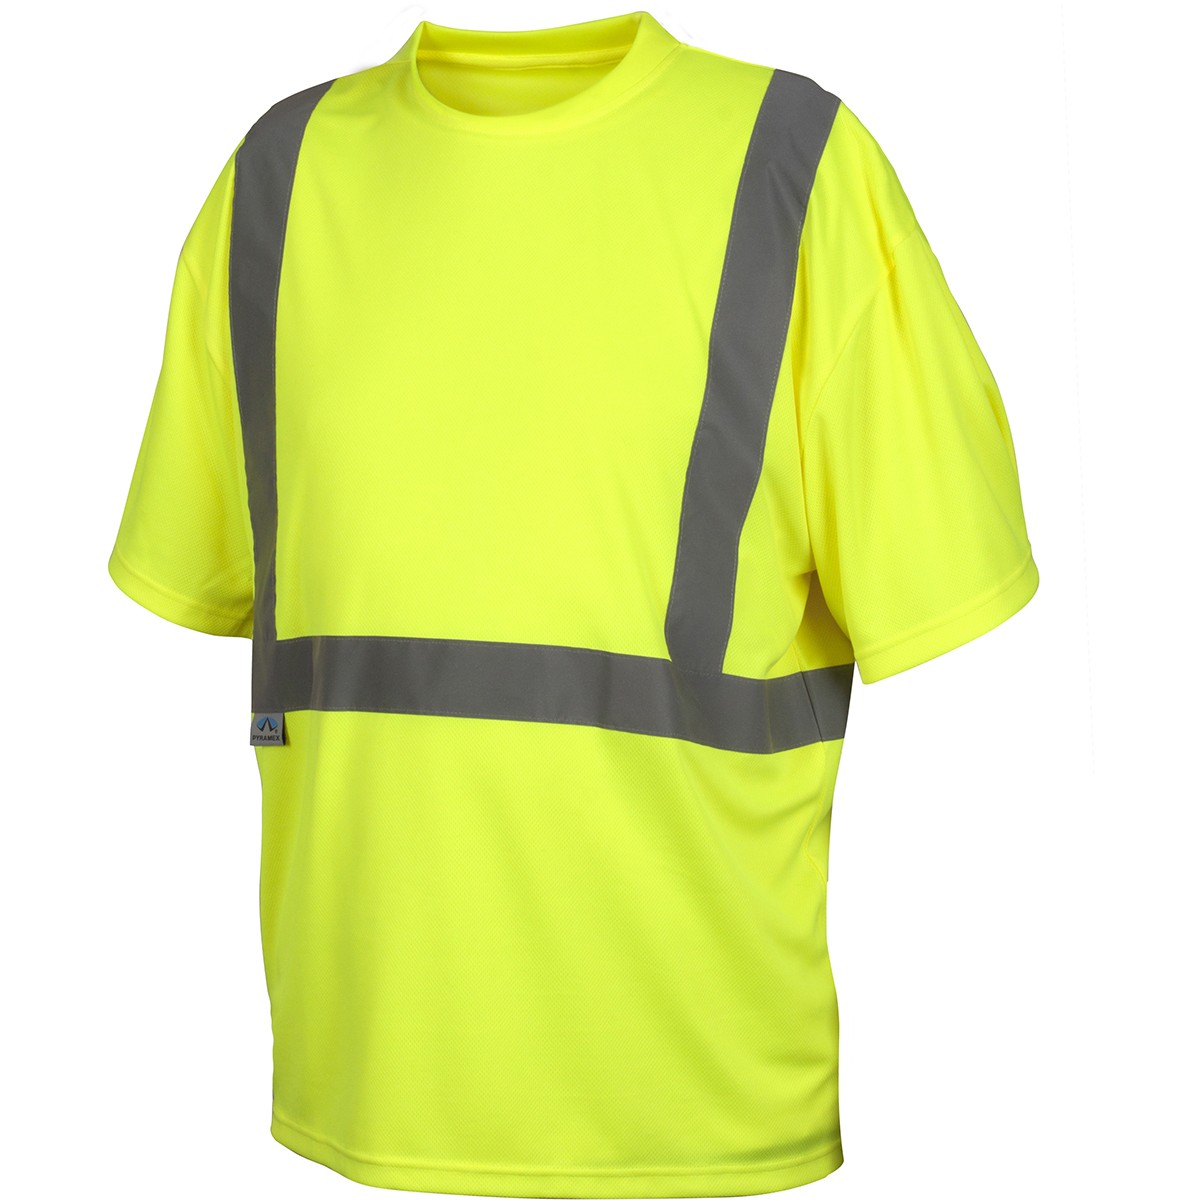 Yellow/Lime Pyramex Class 2 Reflective Safety Shirt with Pocket 